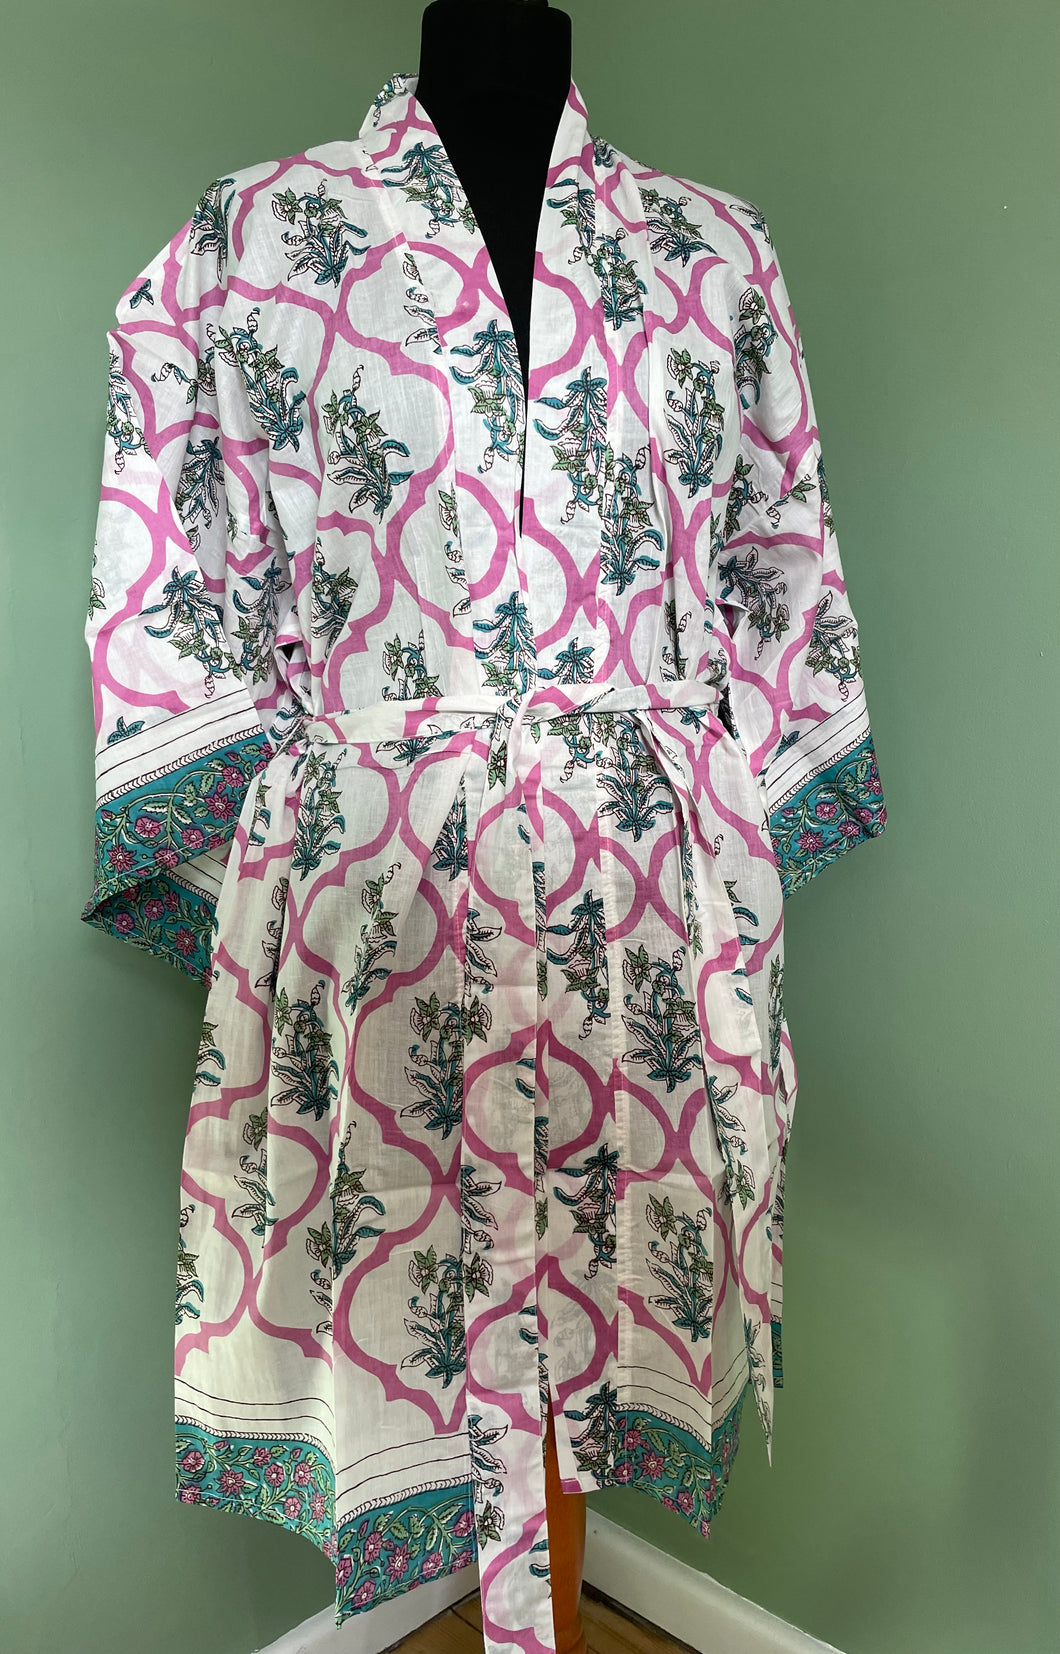 Emma's Emporium block print cotton kimono, summer dressing gown, printed with traditional Indian floral designs on 100% cotton. Visit Emma's Emporium website to buy online alternative, hippy, festival, ethically sourced, women's clothing, accessories, gifts and boho homeware and soft furnishings. Visit Emma's Emporium Hippy festival eclectic boho online shop today.